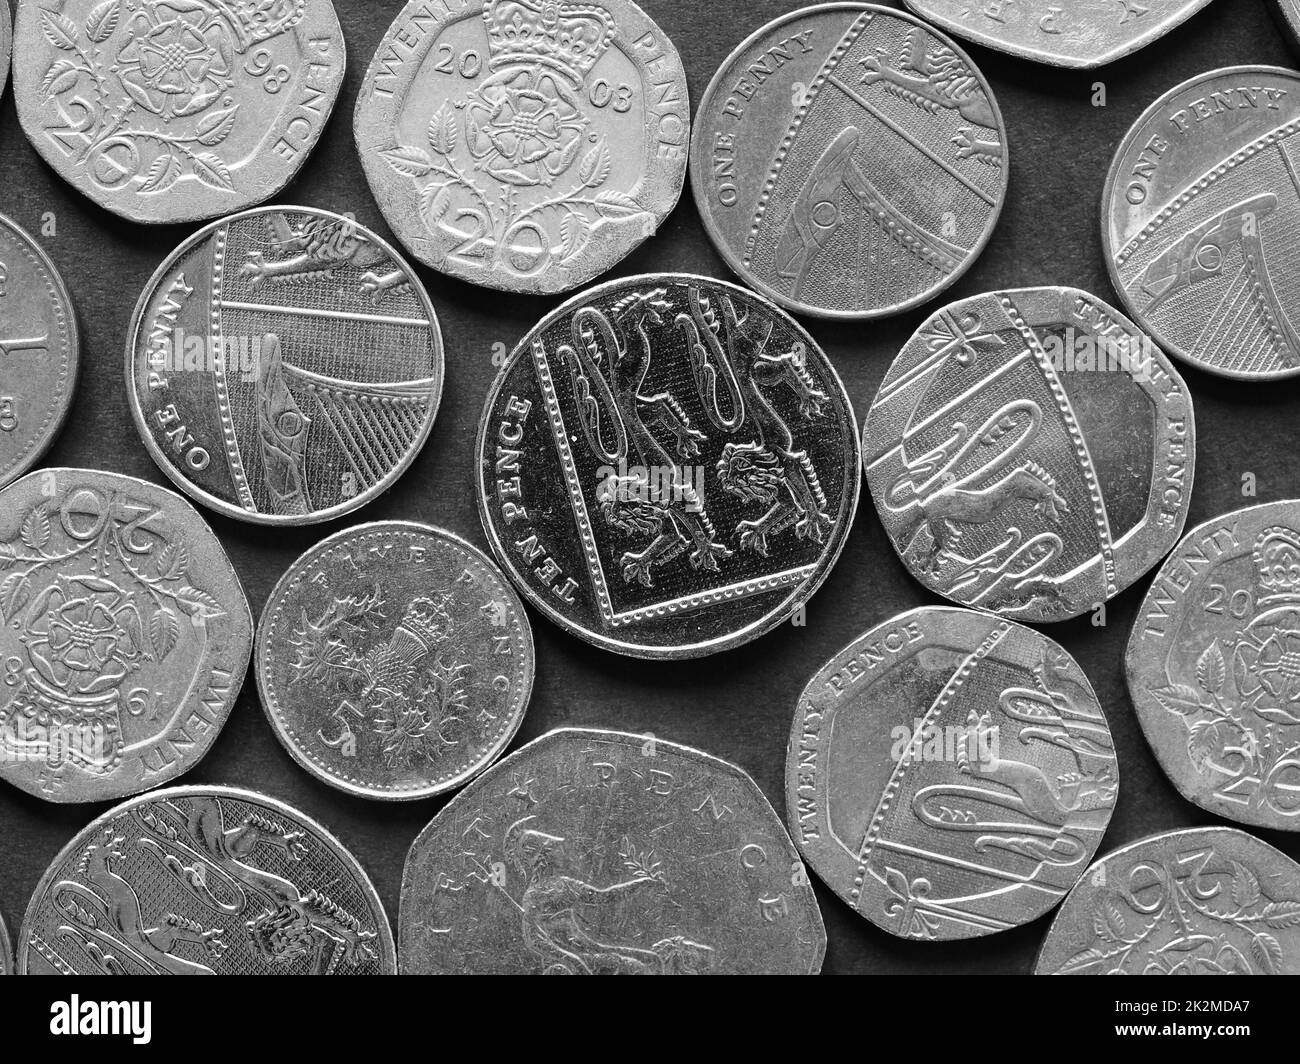 Pound coins, United Kingdom in black and white Stock Photo